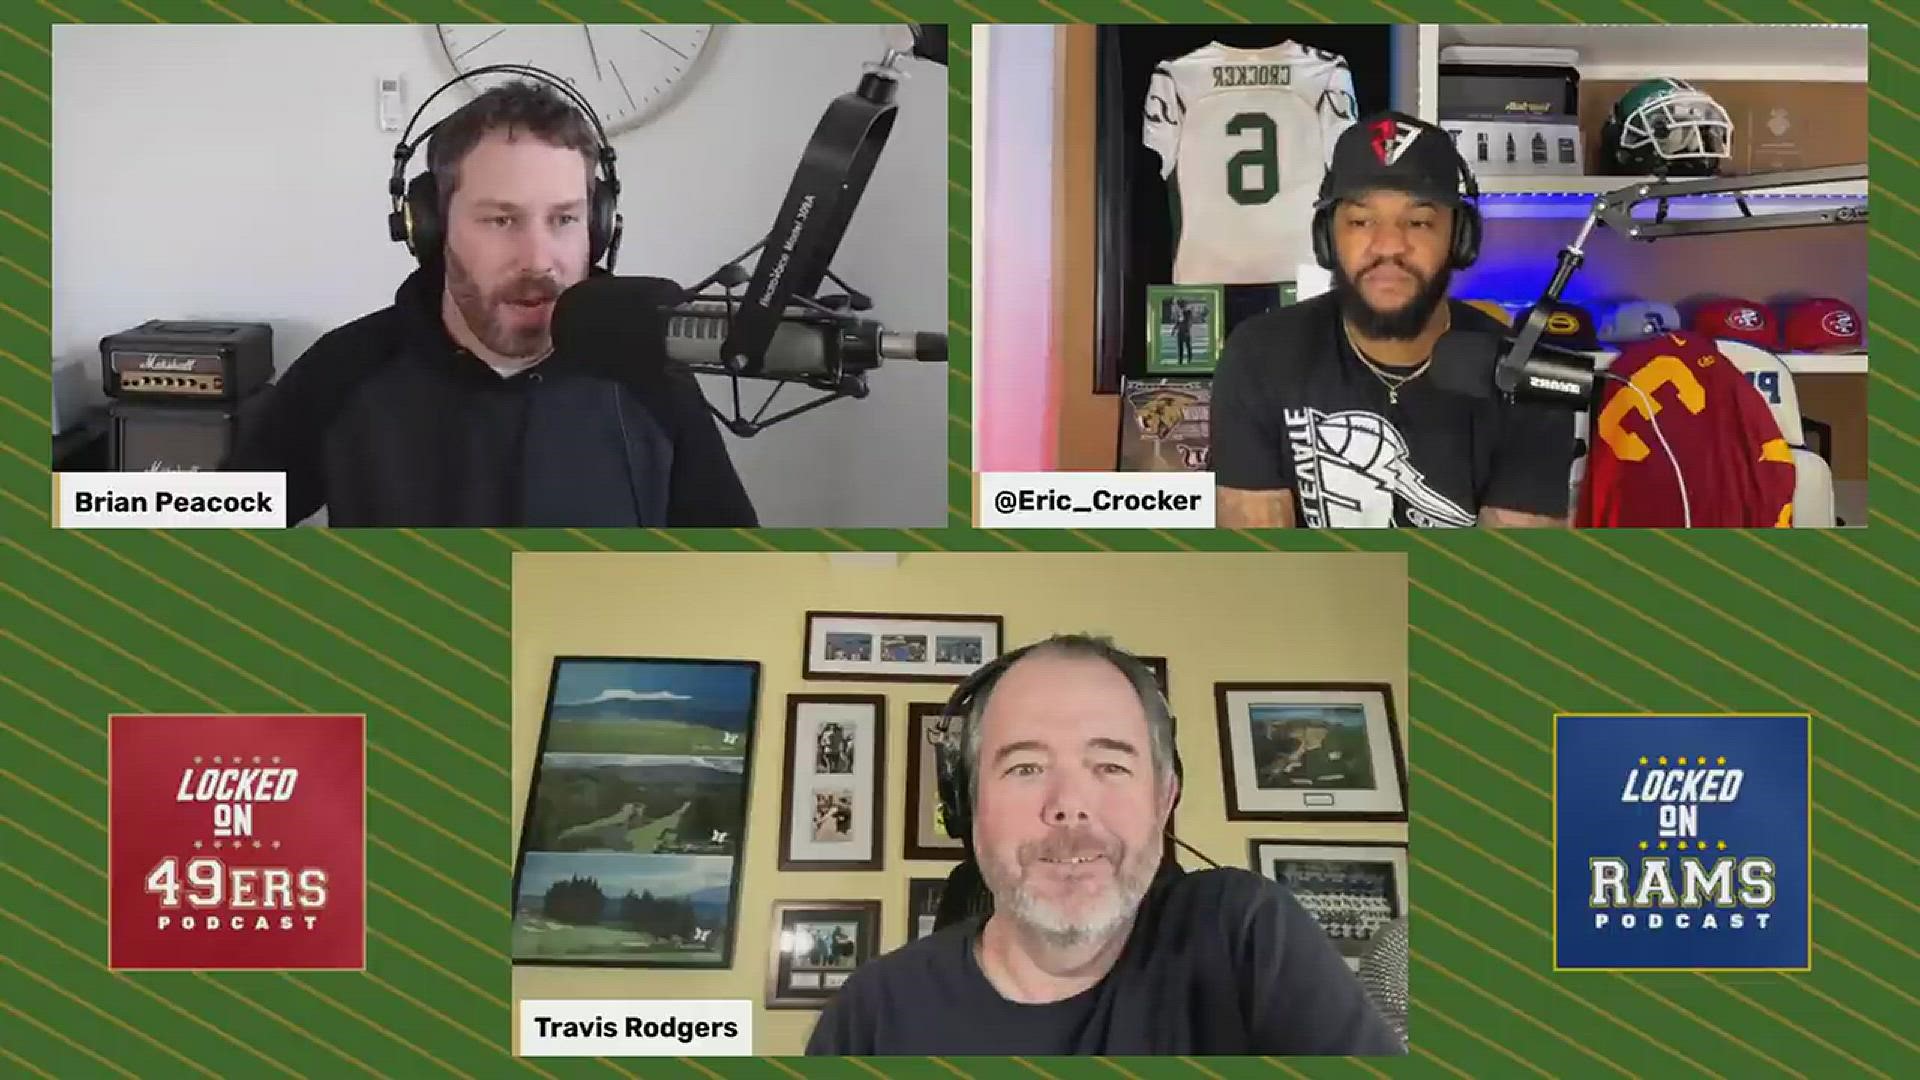 Travis Rodgers of the Locked On Rams podcas, joins Brian Peacock and Eric Crocker to preview the NFC Championship game at Los Angeles.